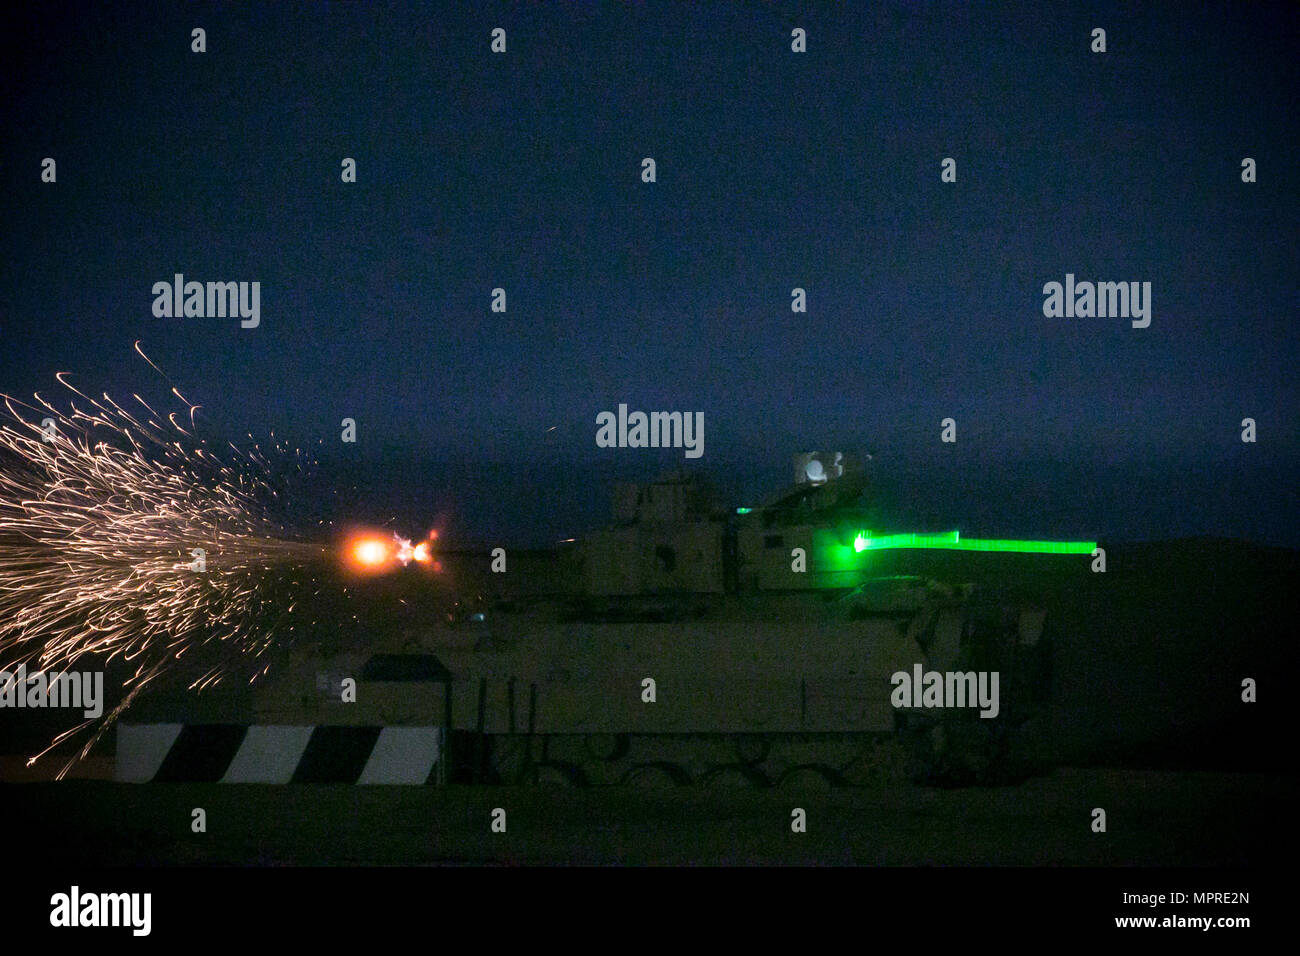 An M2A3 Bradley Fighting Vehicle crew from the 3rd Armored Brigade Combat Team, 1st Cavalry Division shoots at target during the night fire portion of Table VI qualifications at the Udairi Range Complex March 29. The brigade tank and Bradley crews spent about two weeks in the field conducting sustainment gunnery to ensure all the crews qualified at day and night fire to maintain proficiency. (U.S. Army photo by Staff Sgt. Leah R. Kilpatrick, 3rd Armored Brigade Combat Team Public Affairs Office, 1st Cavalry Division (released) Stock Photo